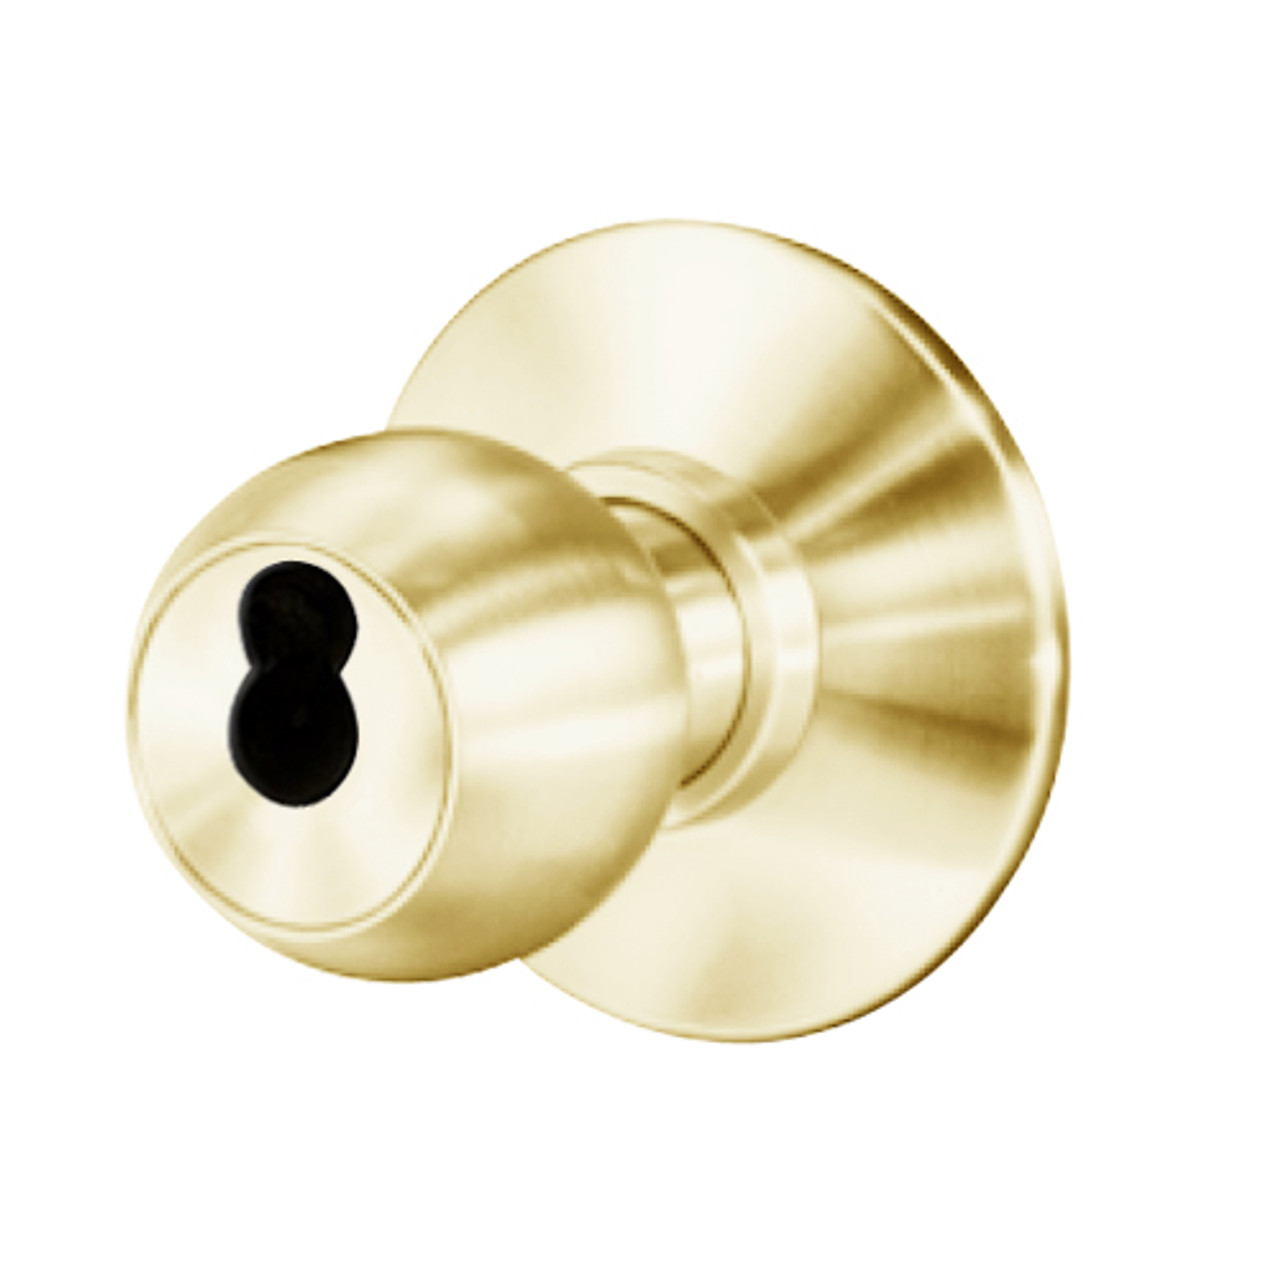 8K37XR4DS3605 Best 8K Series Special Heavy Duty Cylindrical Knob Locks with Round Style in Bright Brass